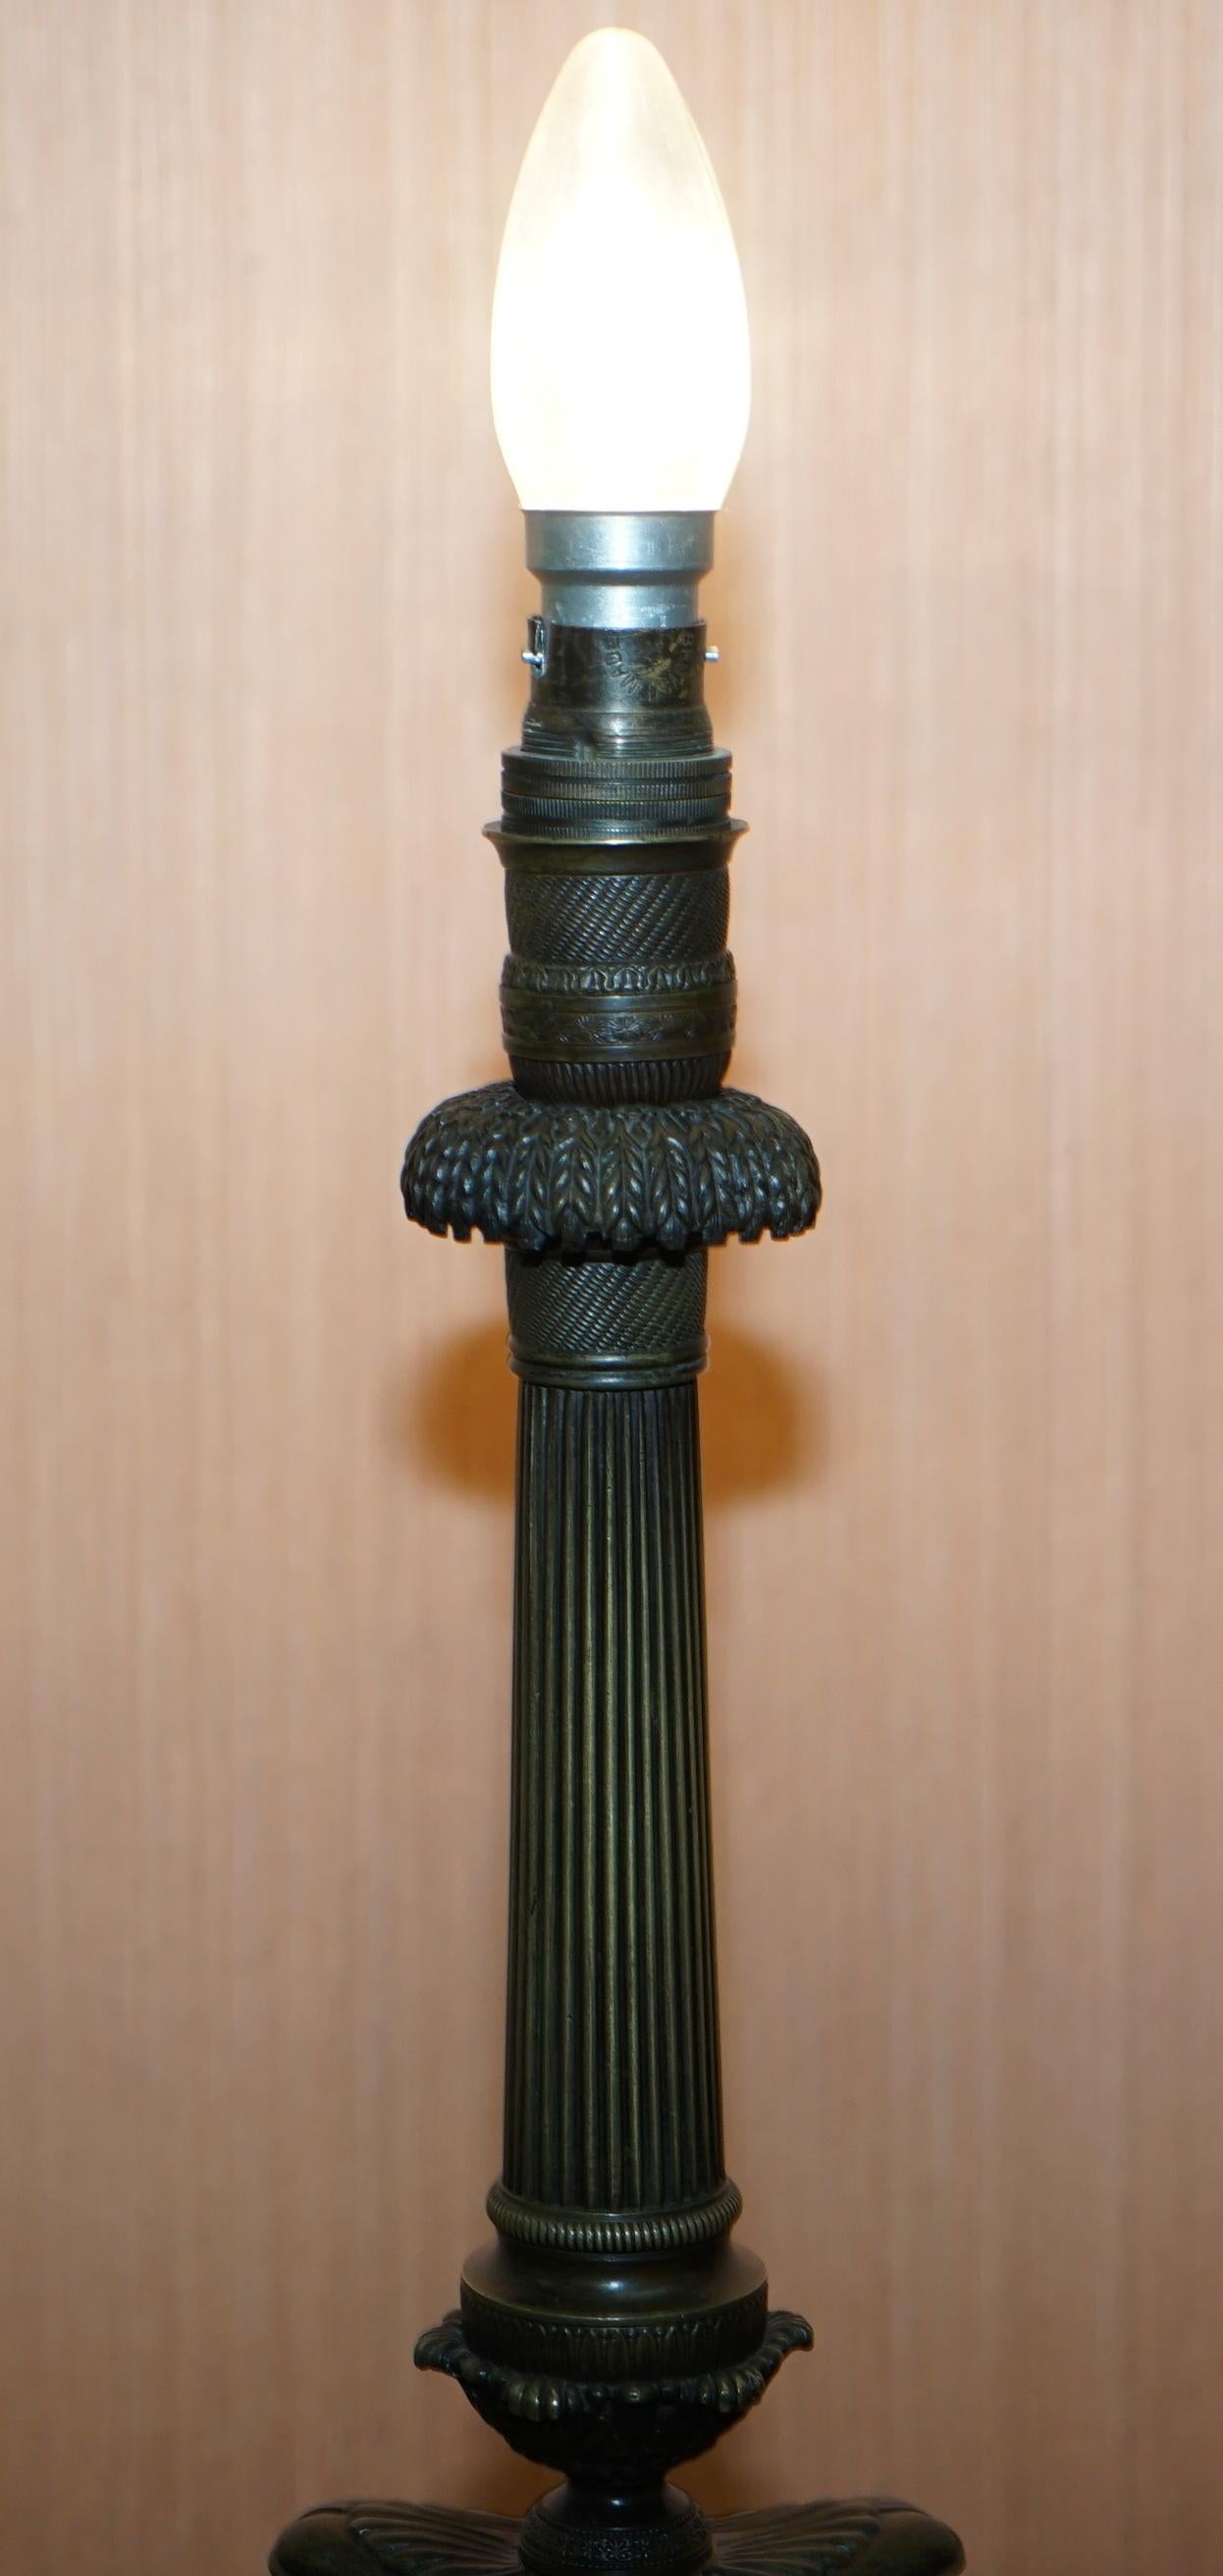 We are delighted to offer for sale this lovely original circa 1860-1880 solid bronze candlestick lamp conversion of a Corinthian pillar with Lion paw feet

This lamp has been in my private collection for years, it has a polished black marble base,